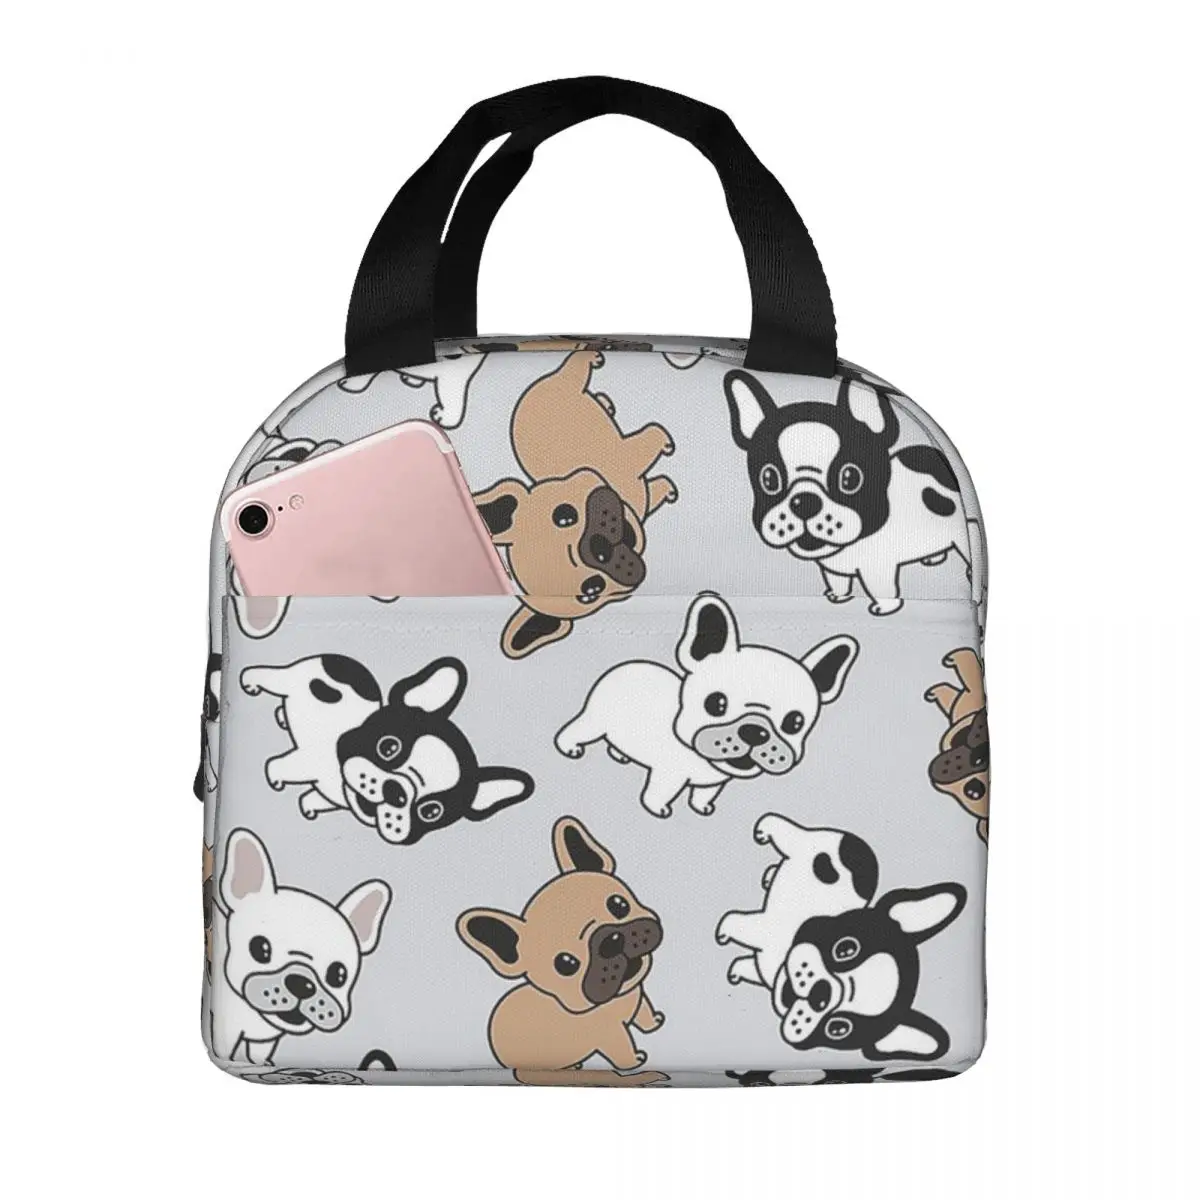 Lunch Bags for Men Women Frenchie French Bulldog Pattern Insulated Cooler Portable School Dog Oxford Lunch Box Food Storage Bags